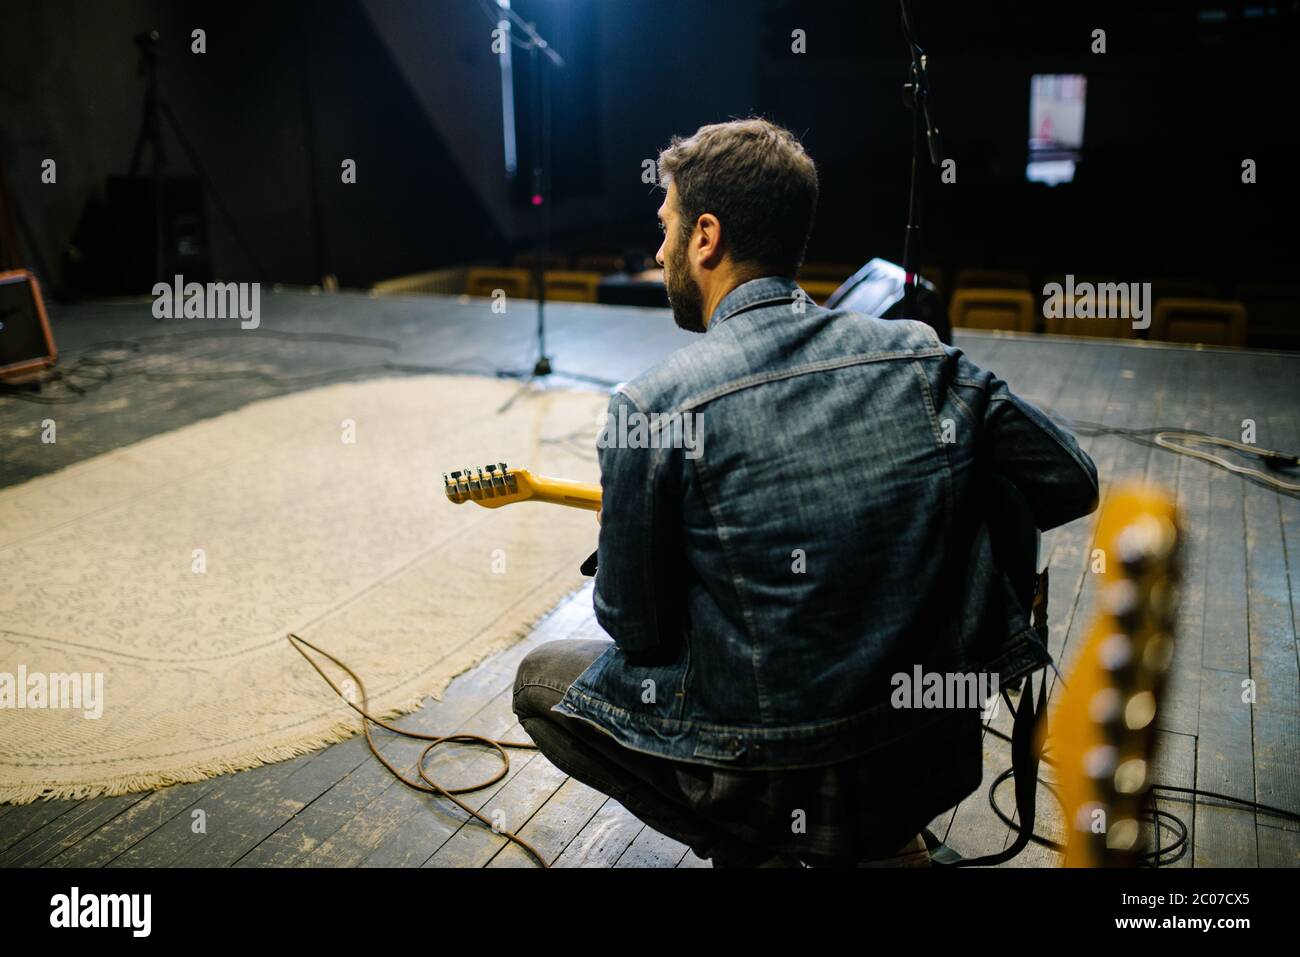 Back view of young guitarist on stage. Soundcheck concept. Stock Photo